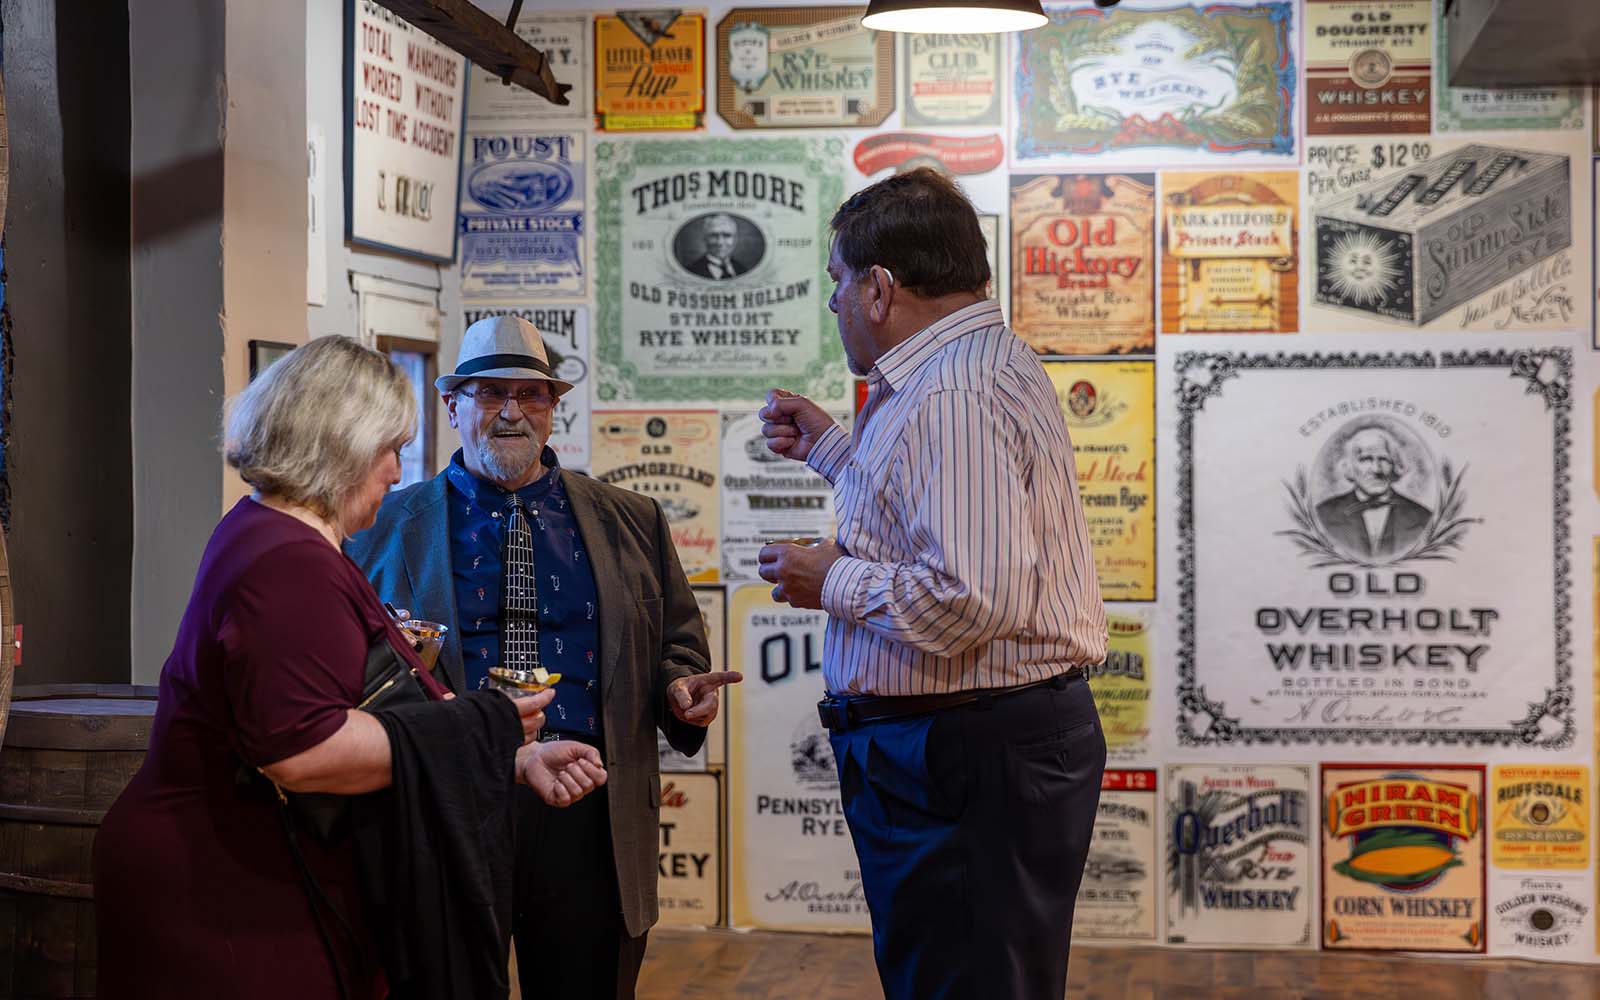 Three people in conversation in a gallery with old booze labels and ads reproduced on a wall behind them.